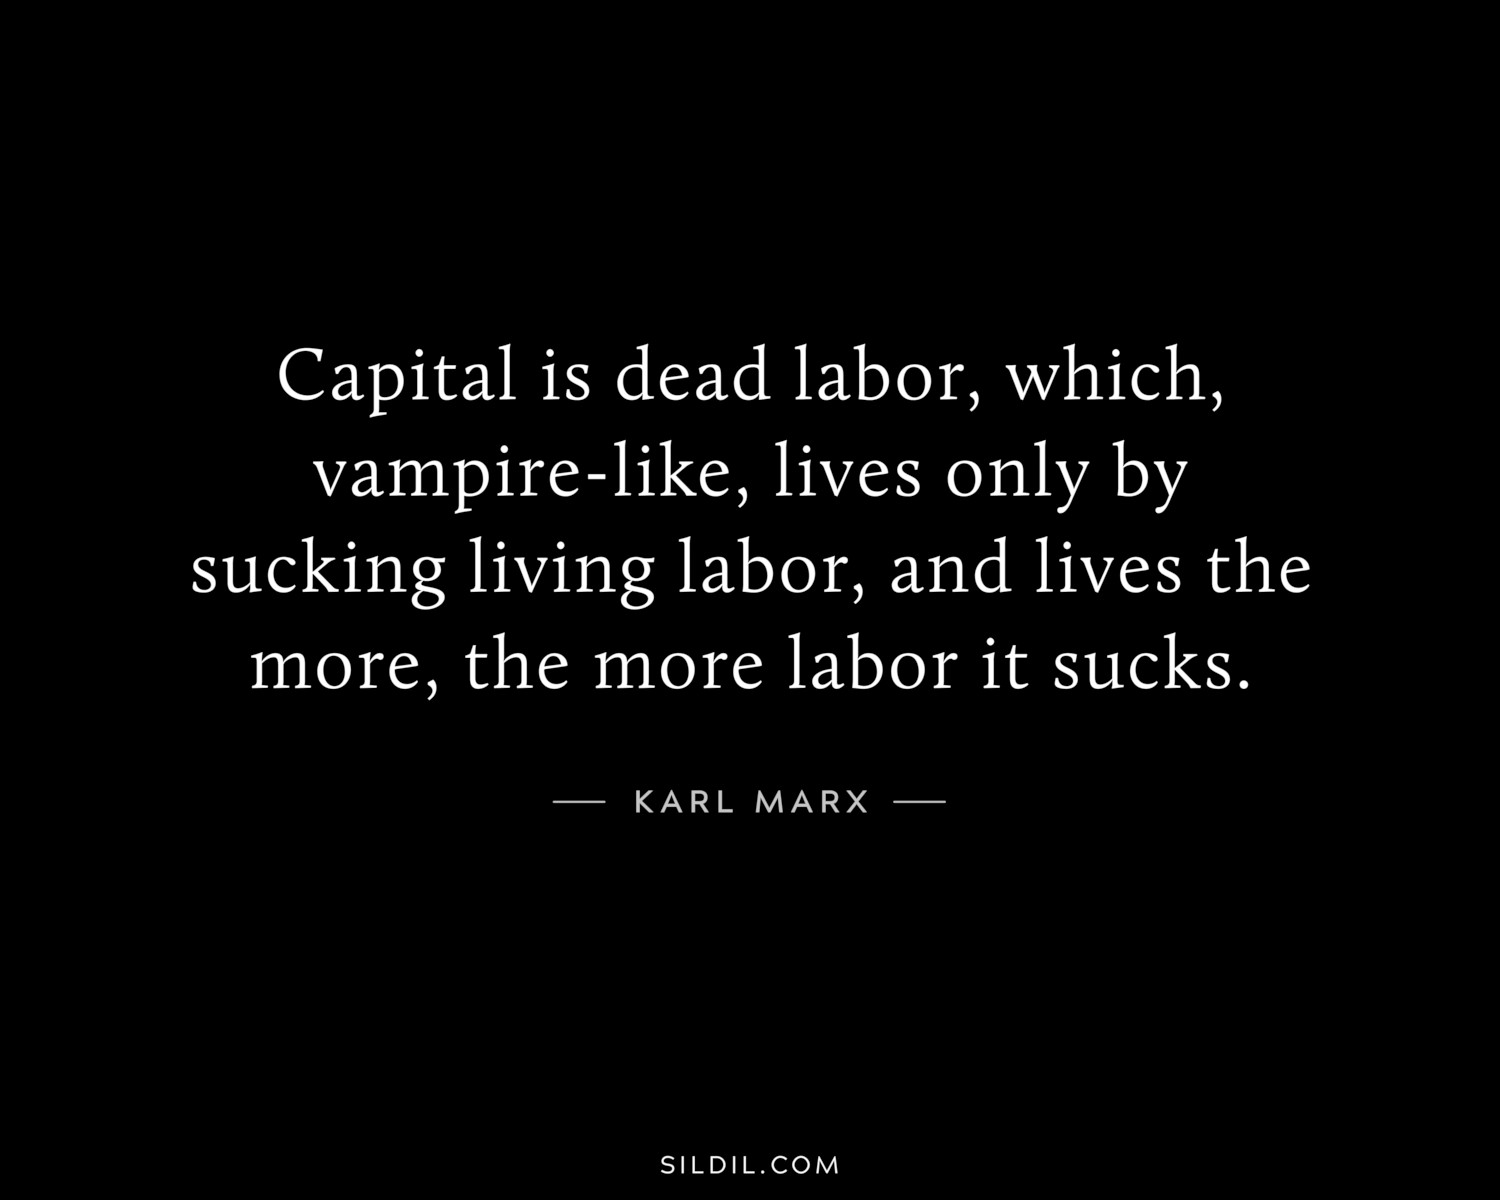 Capital is dead labor, which, vampire-like, lives only by sucking living labor, and lives the more, the more labor it sucks.